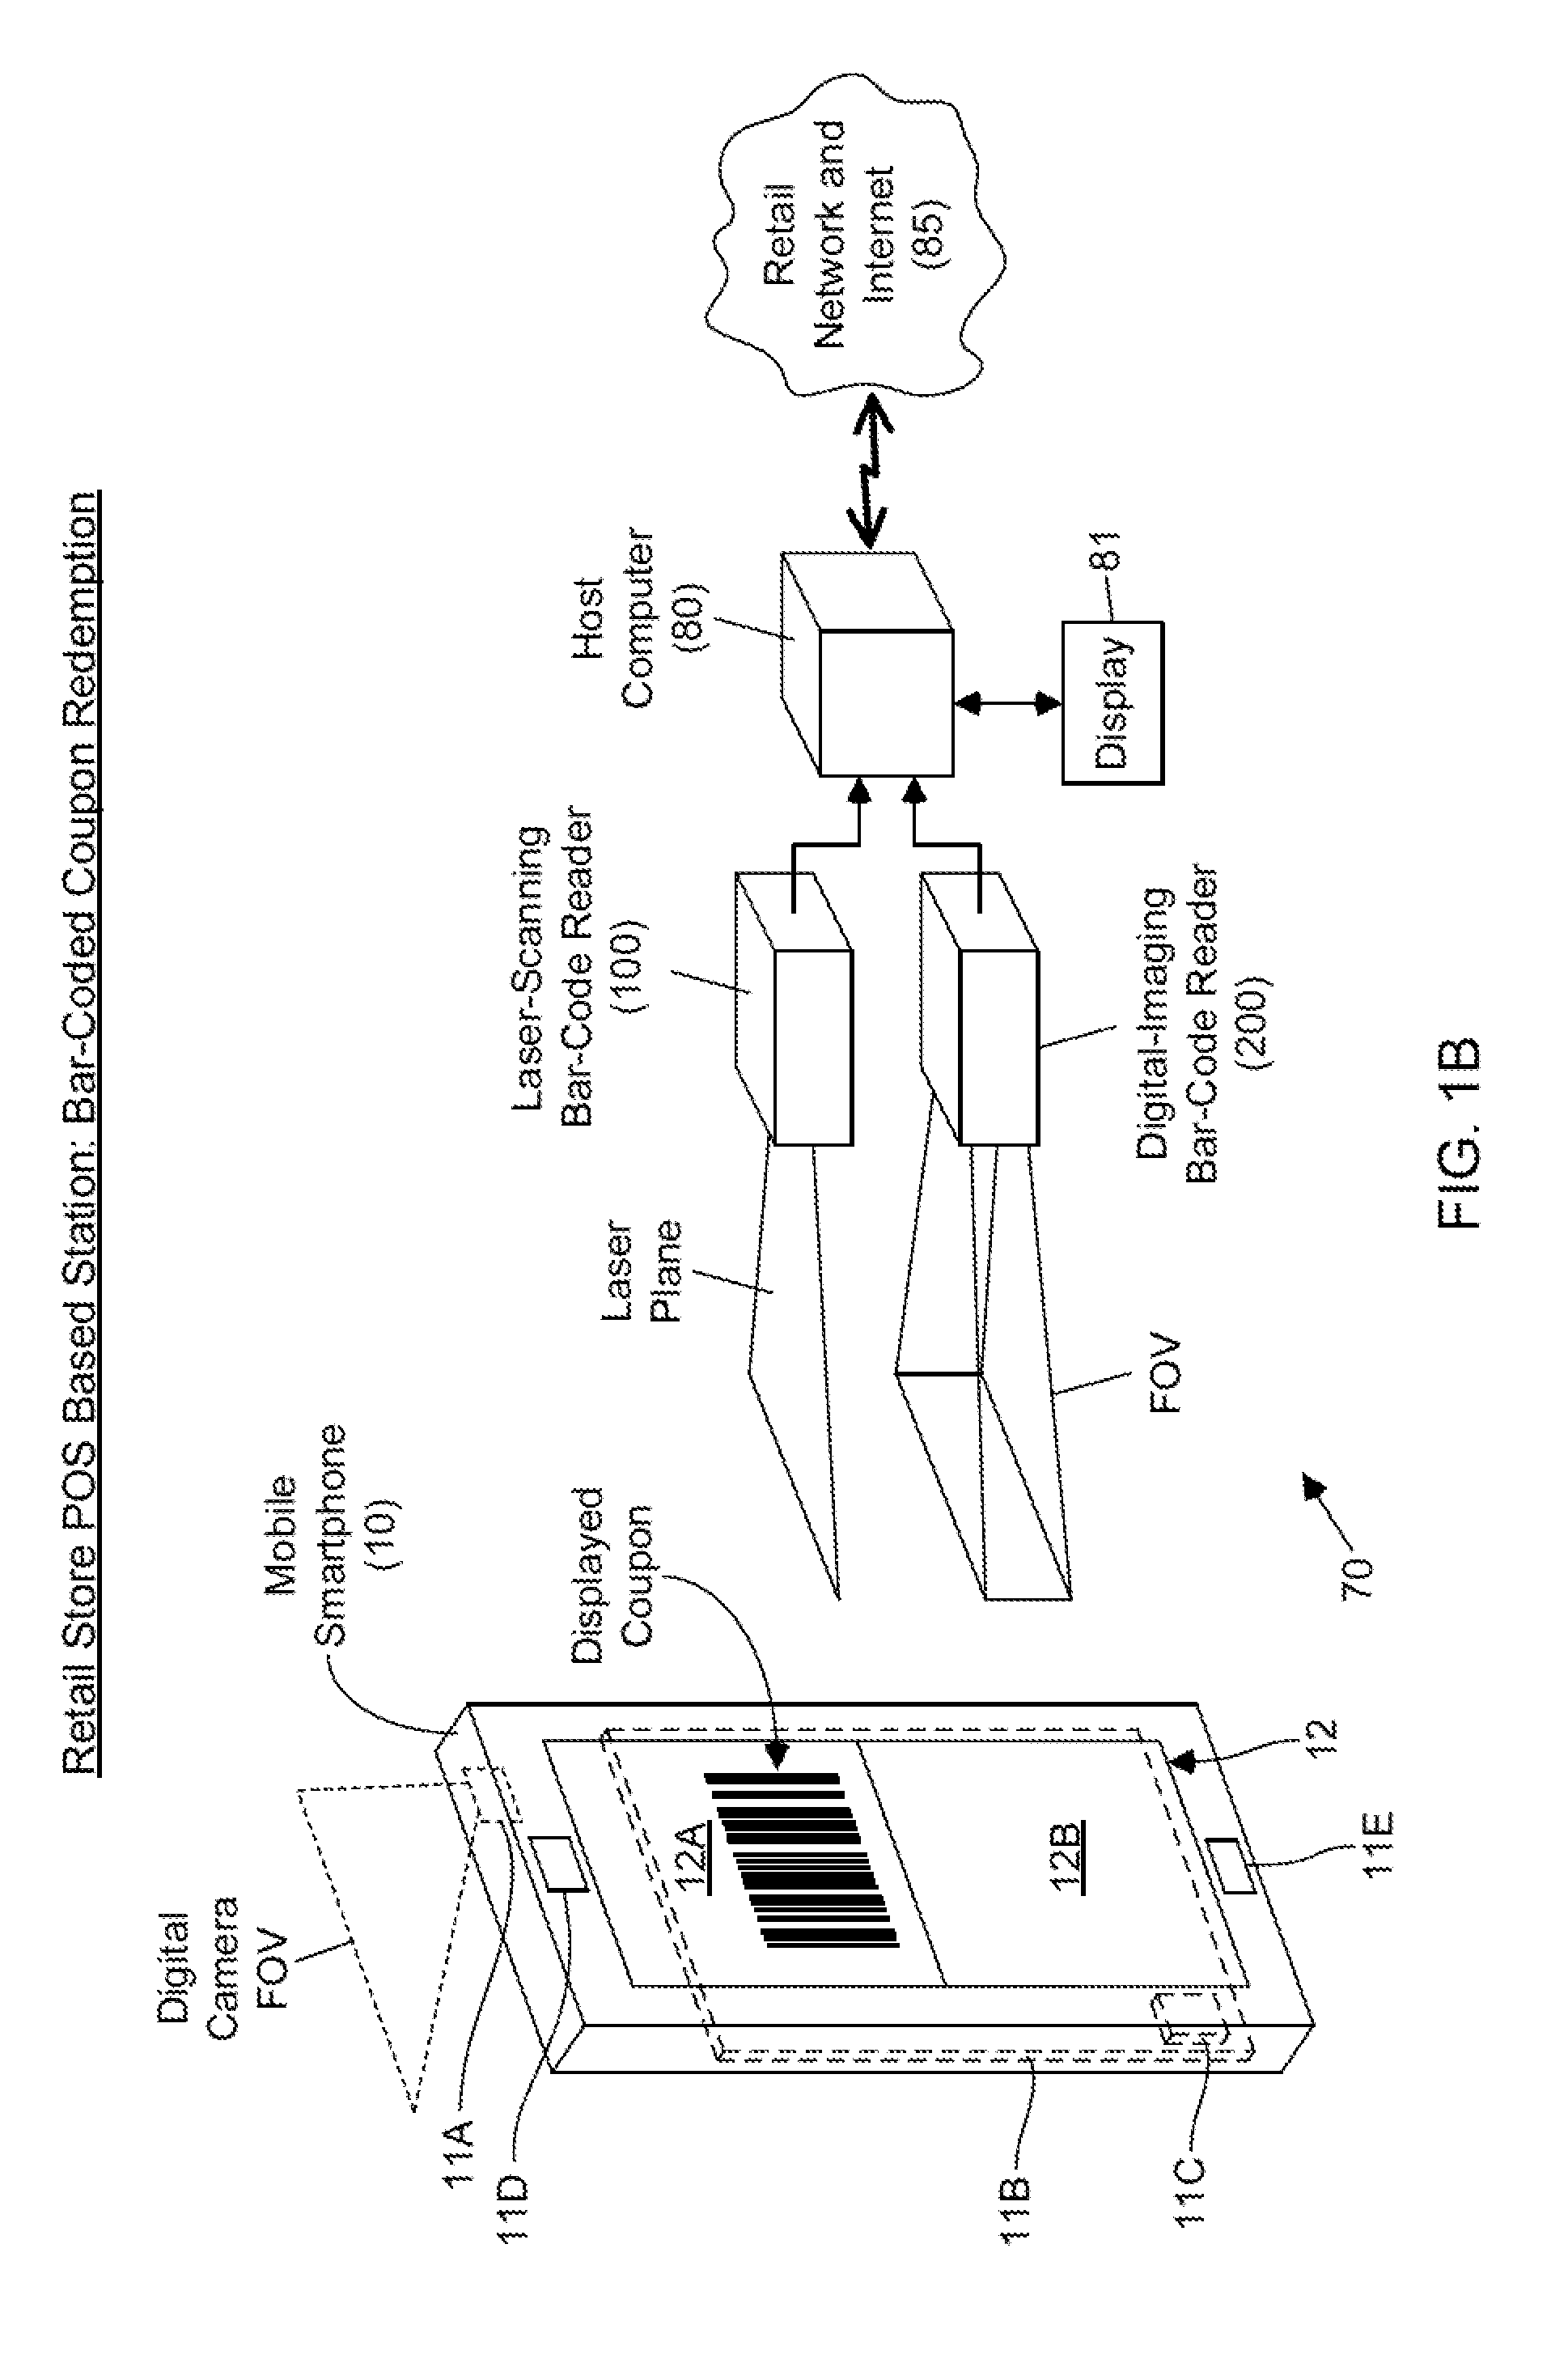 Apparatus for displaying bar codes from light emitting display surfaces